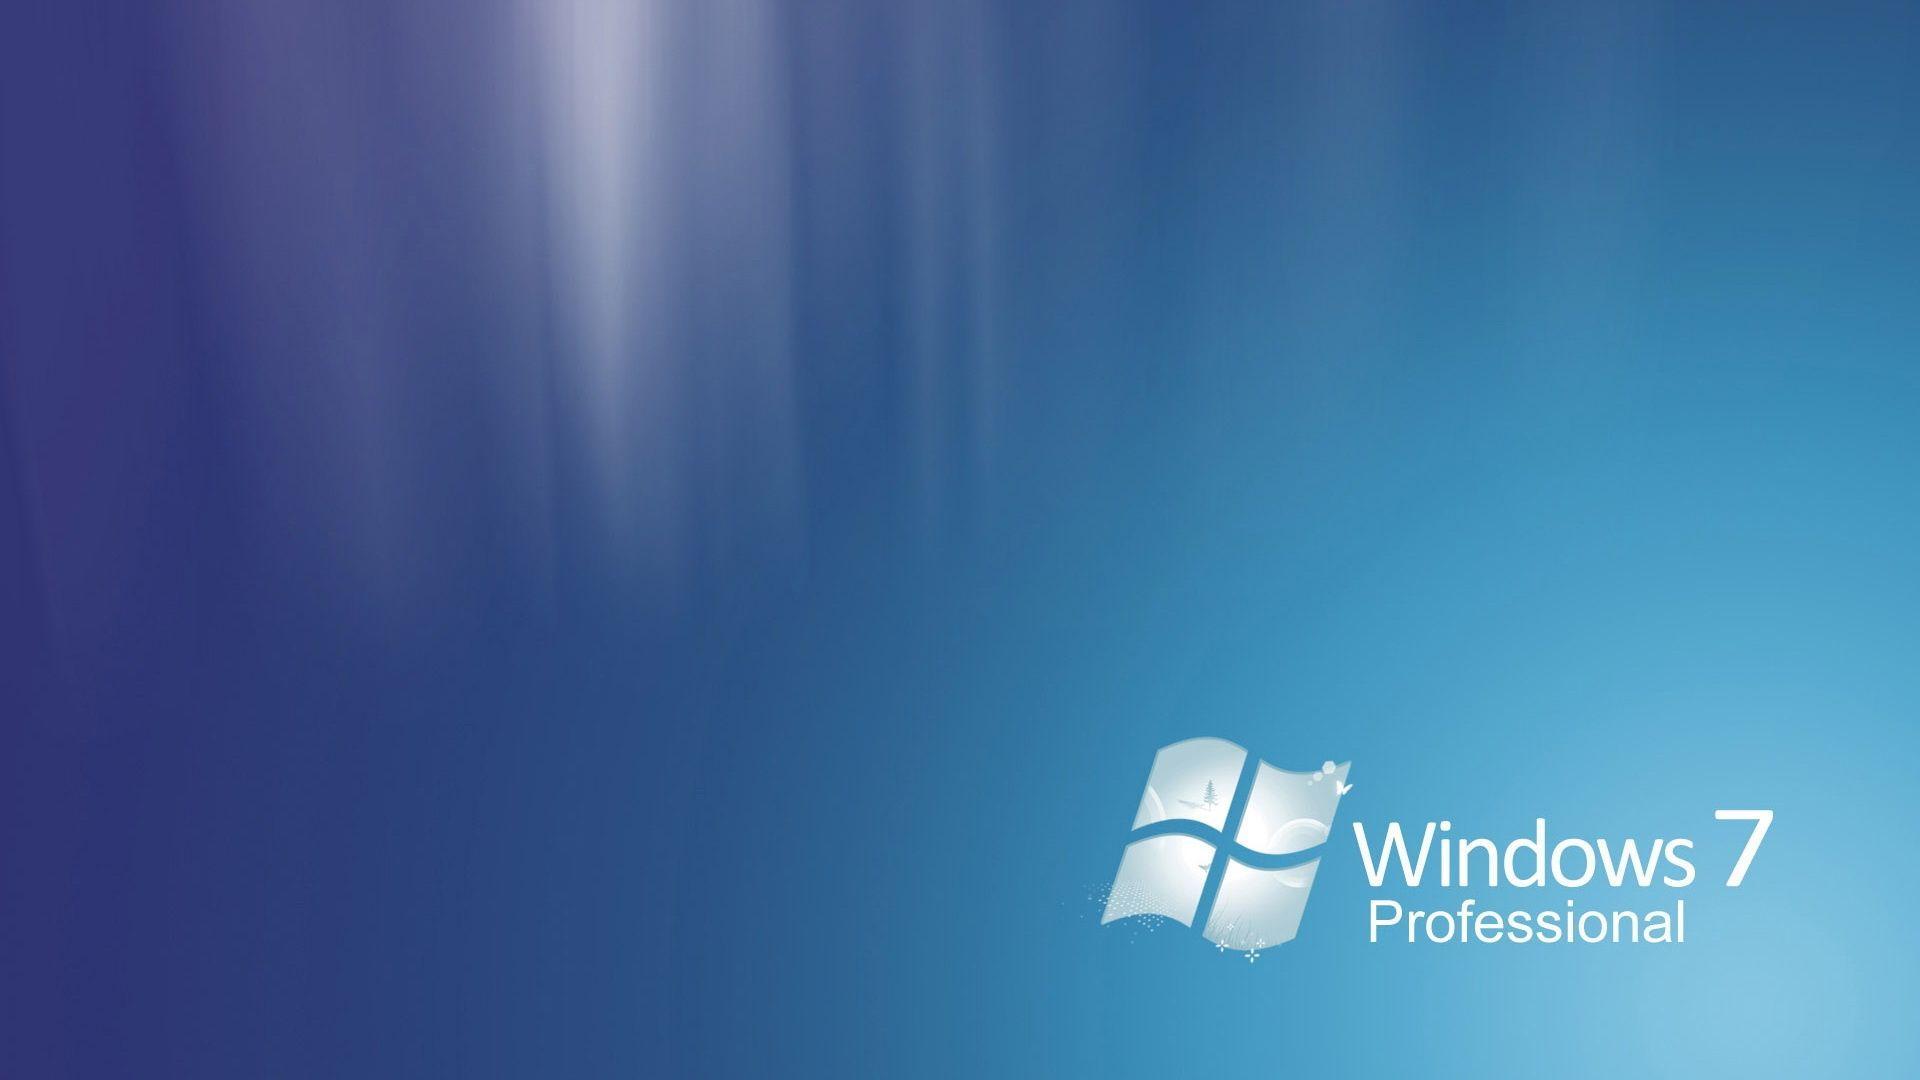 Windows 8 and 81 Pro Pack and Media Pack are no longer